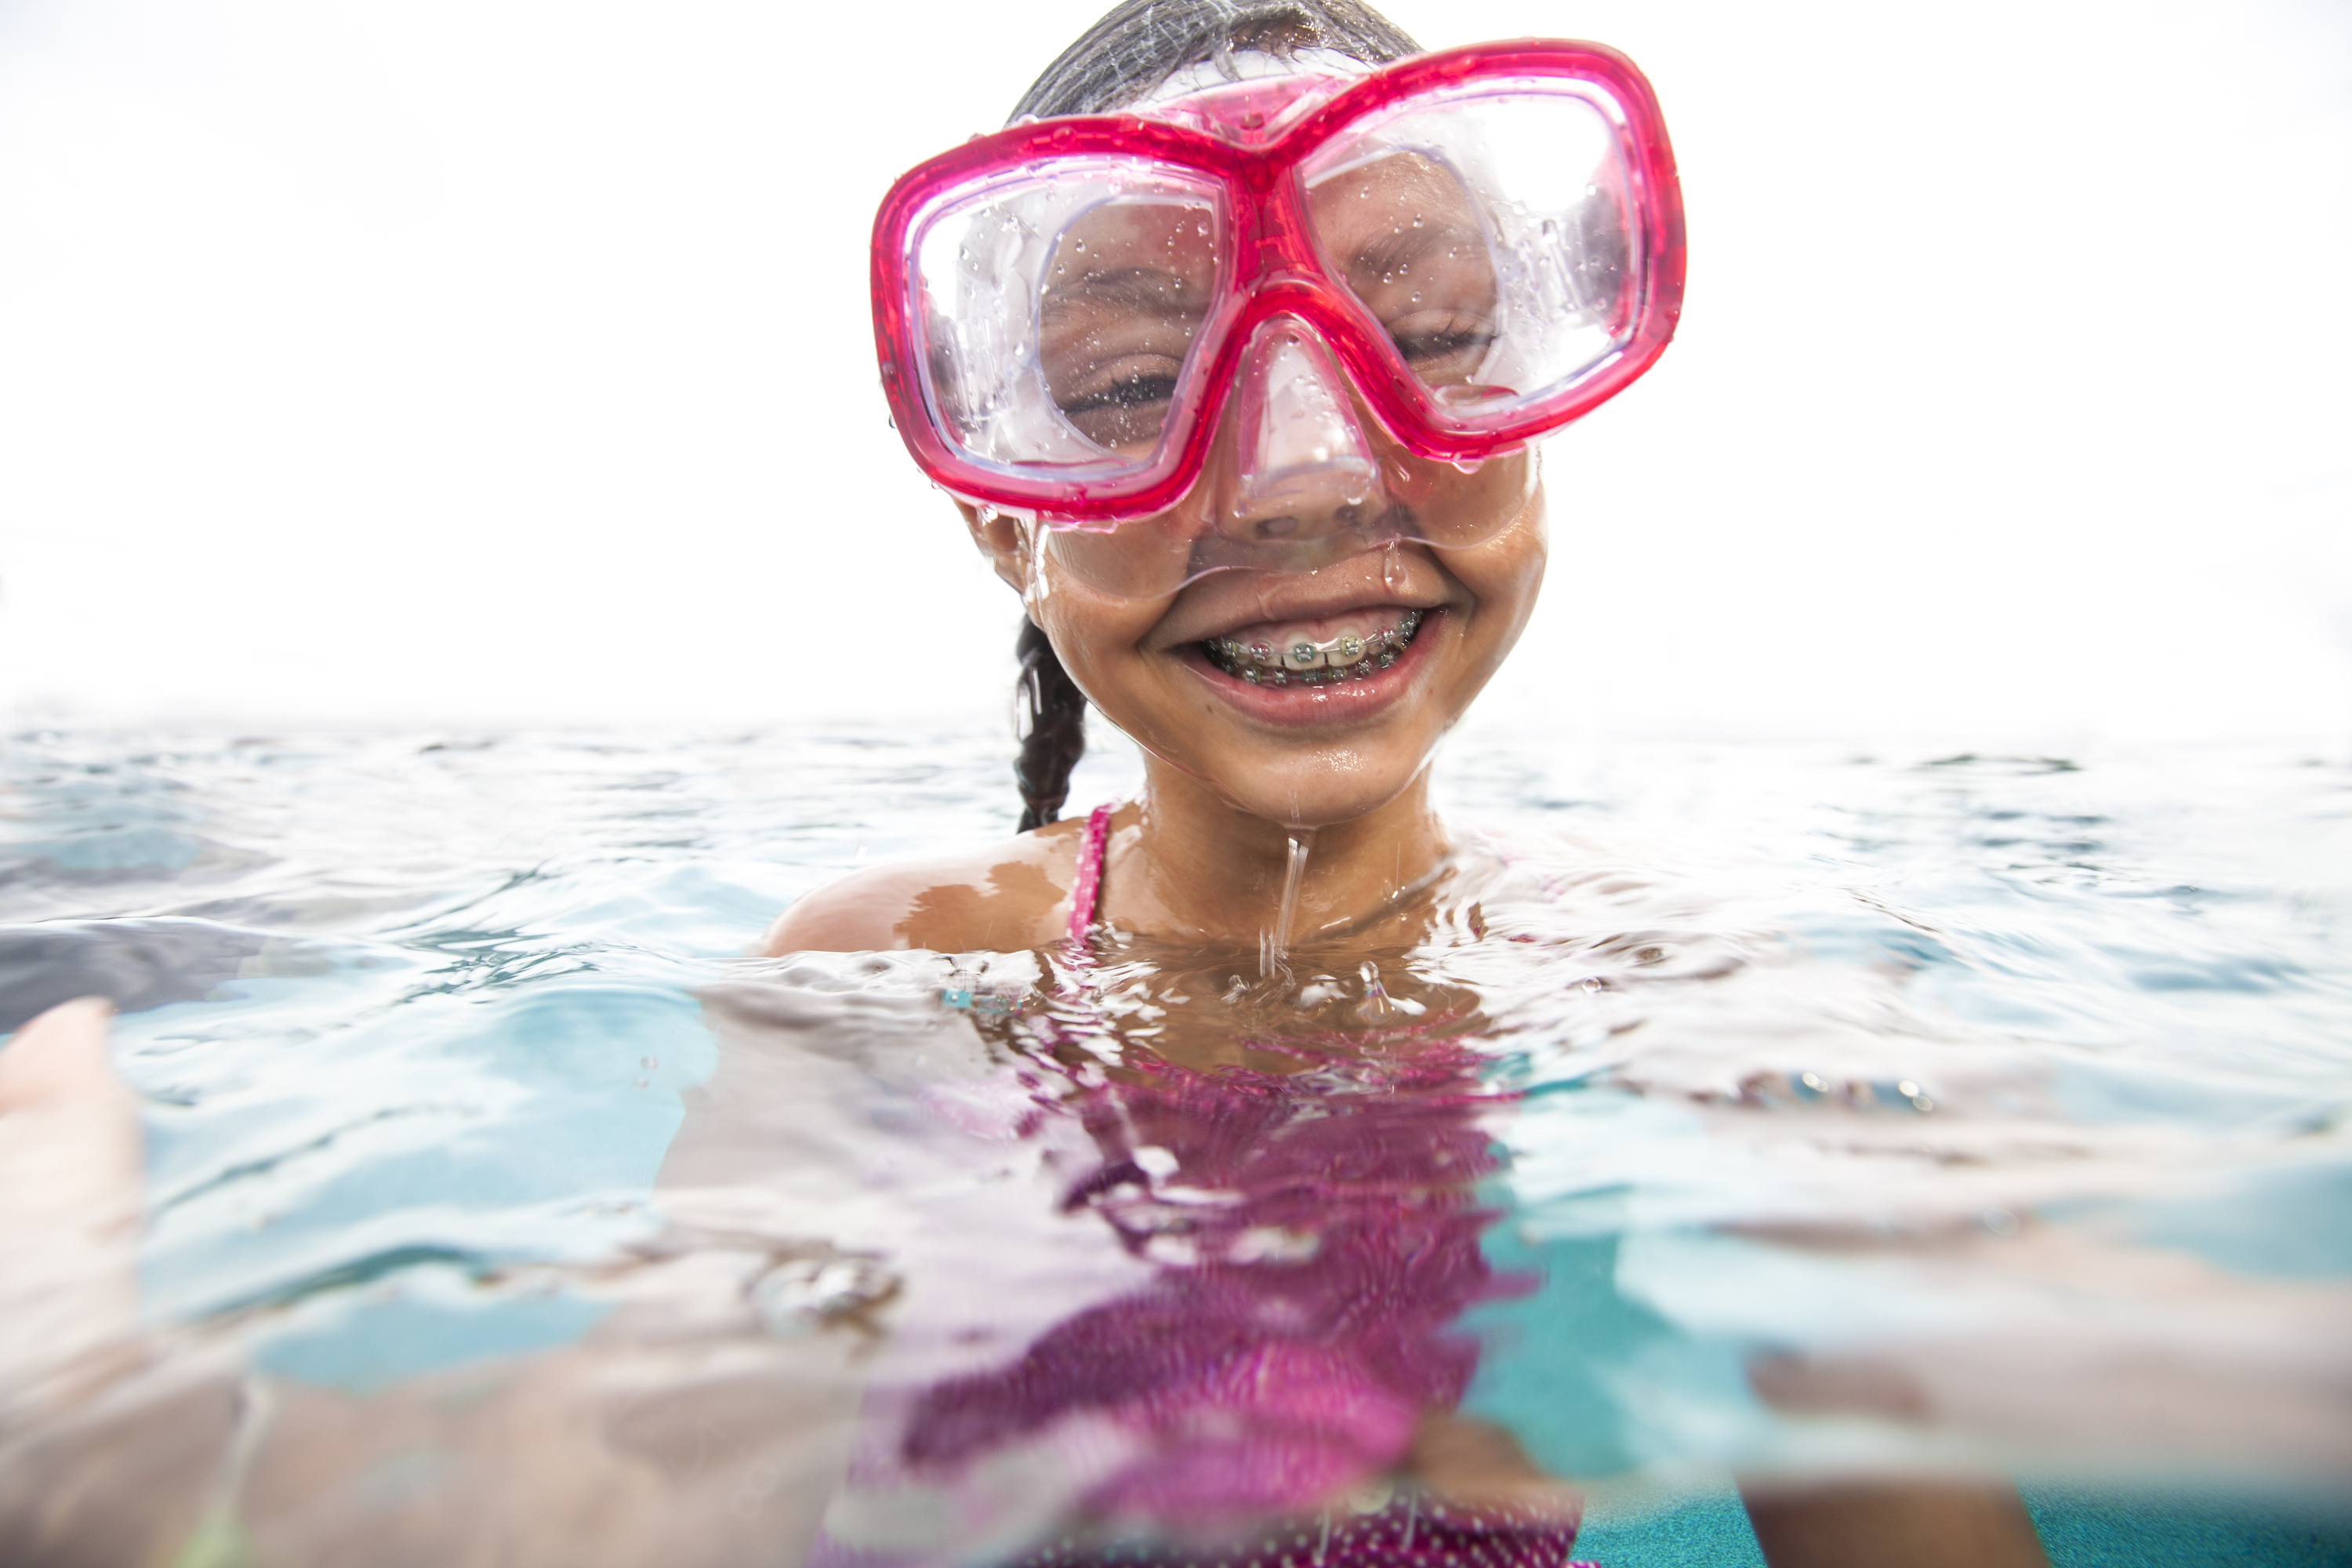 Young girl, snorkeling, goggles, beach, Caudill & McNeight Orthodontics, how to avoid stained teeth after braces or Invisalign